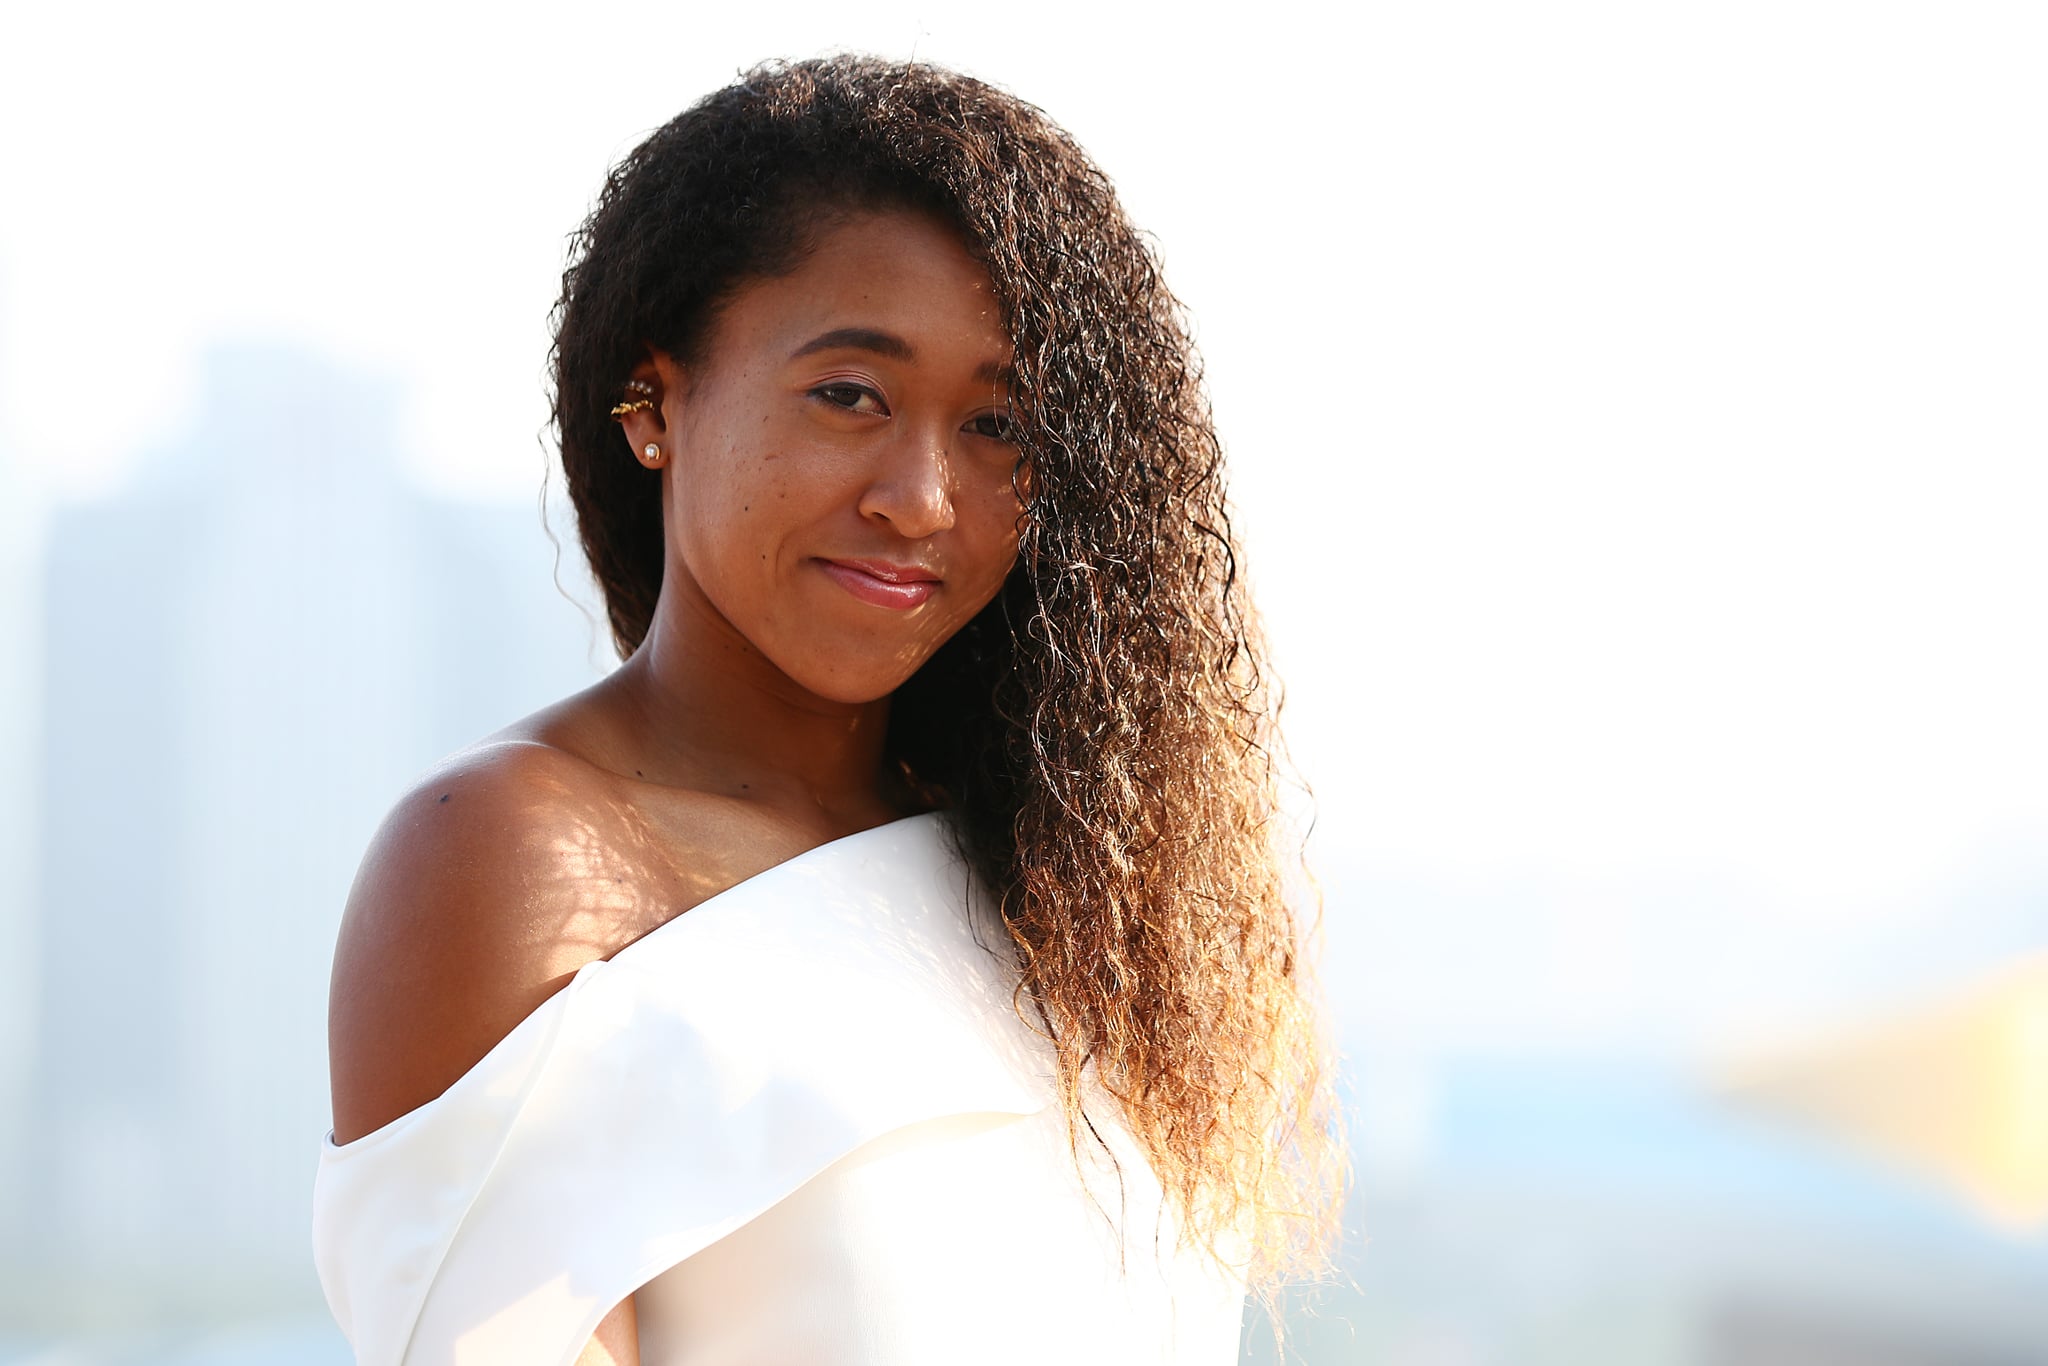 SHENZHEN, CHINA - OCTOBER 25: Naomi Osaka of Japan arrives for the 2019 WTA Finals official photo shoot at Lotus Hill Park on October 25, 2019 in Shenzhen, China. (Photo by Clive Brunskill/Getty Images)